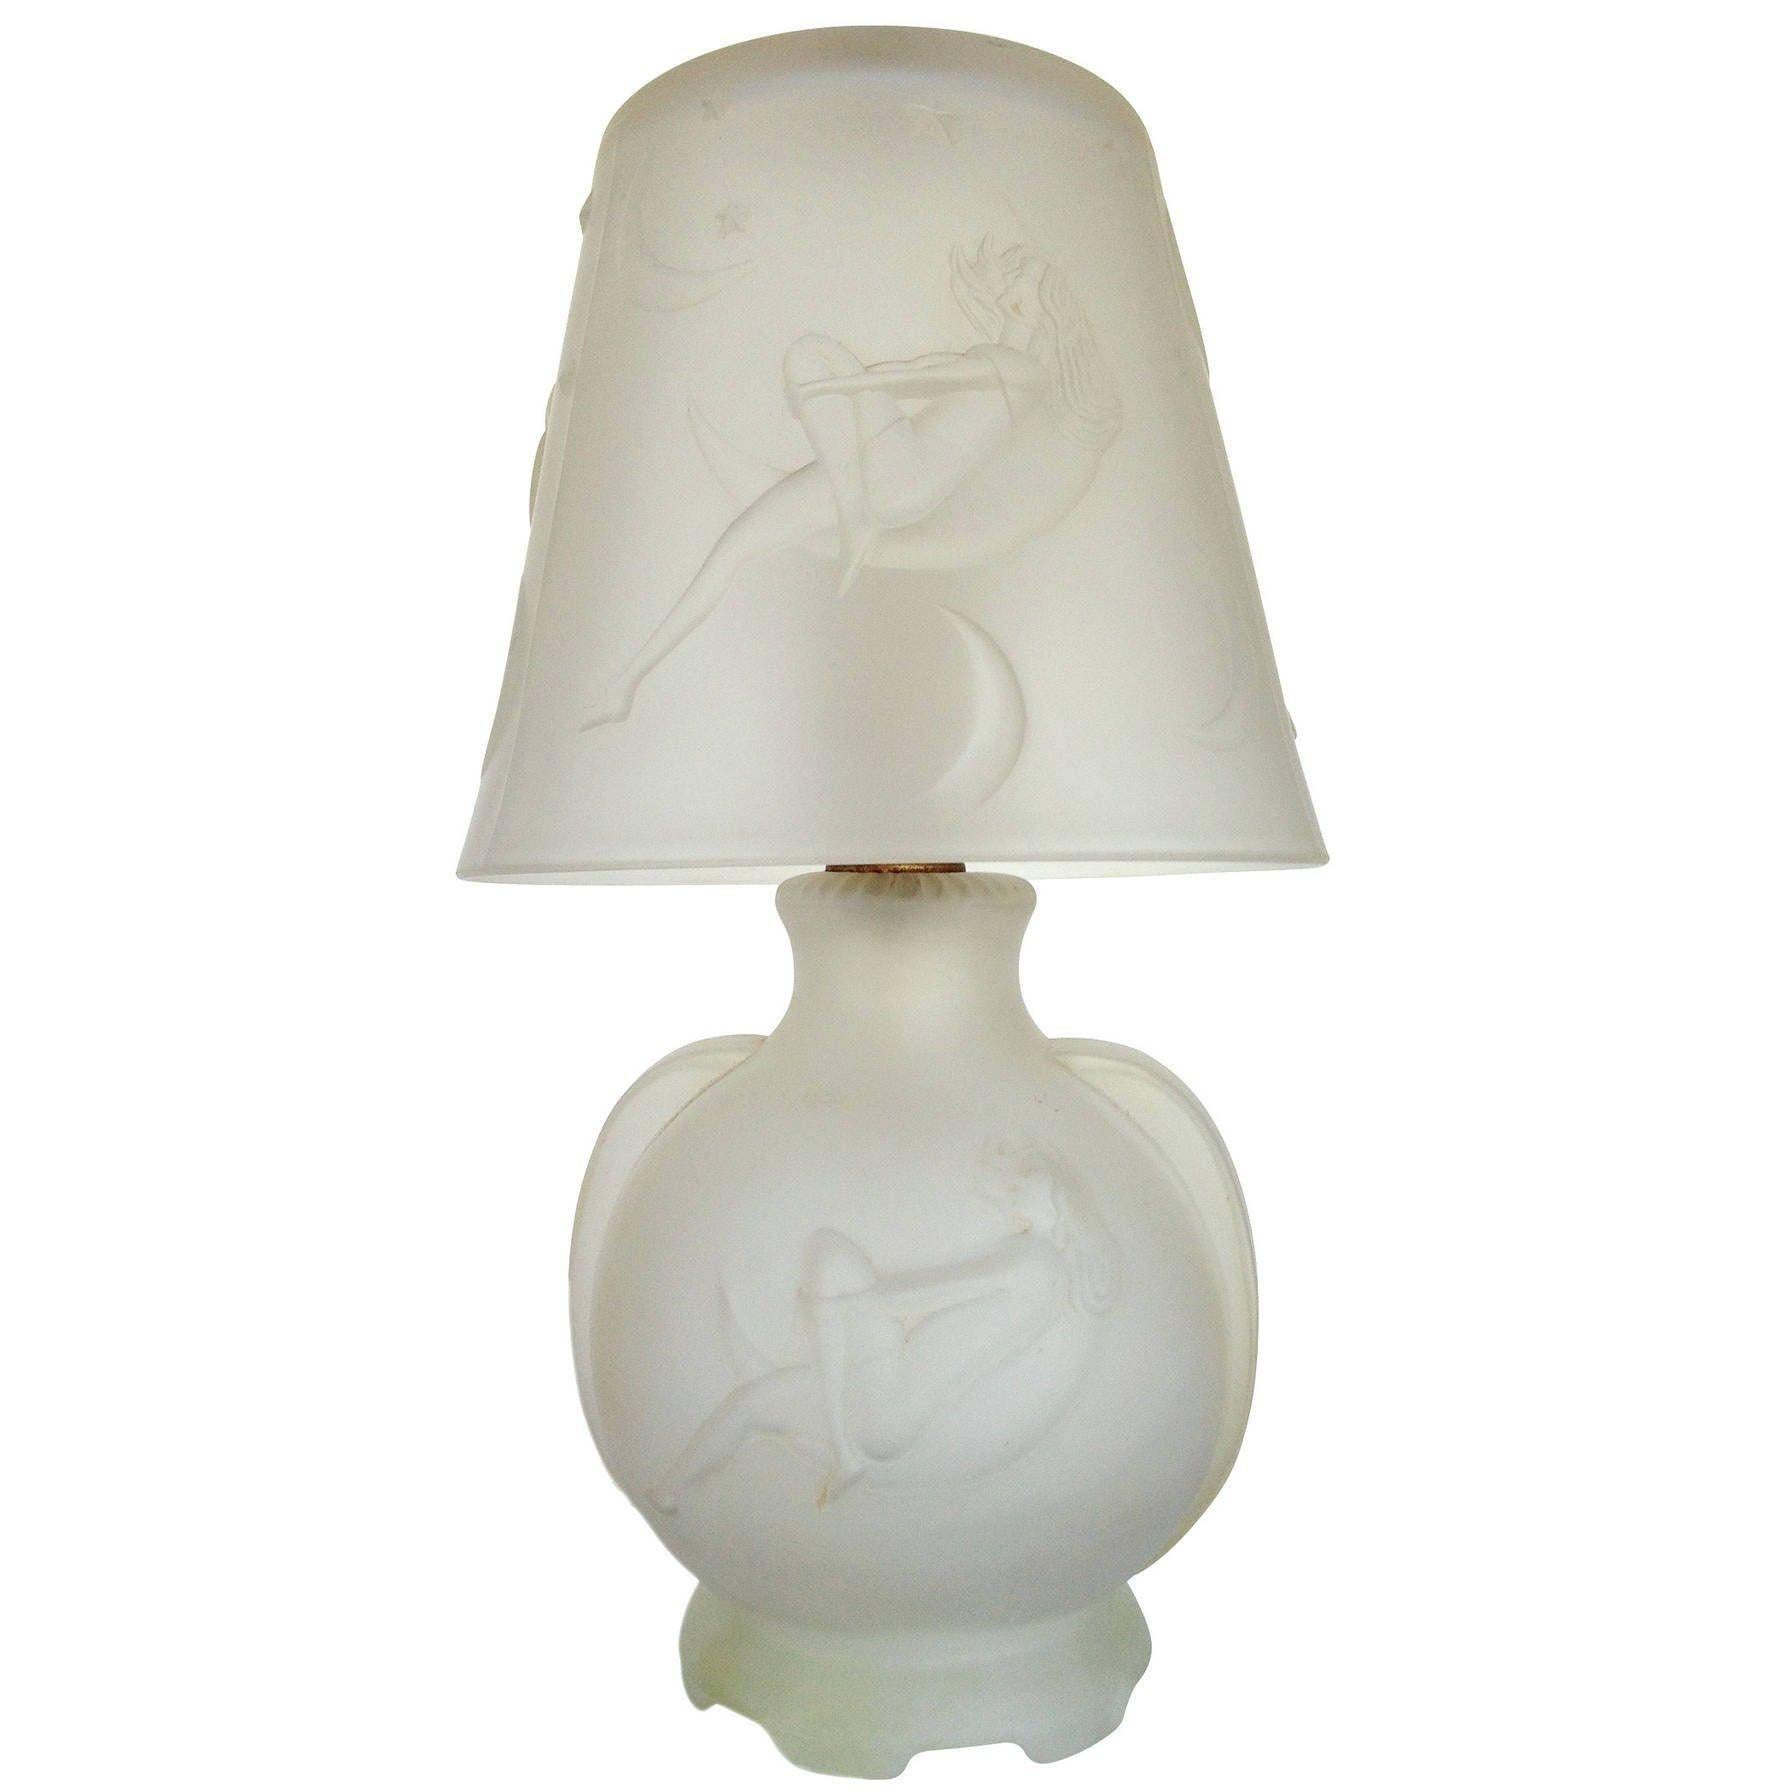 American Frosted Glass Crescent Moon Boudoir Lamp, circa 1920 For Sale